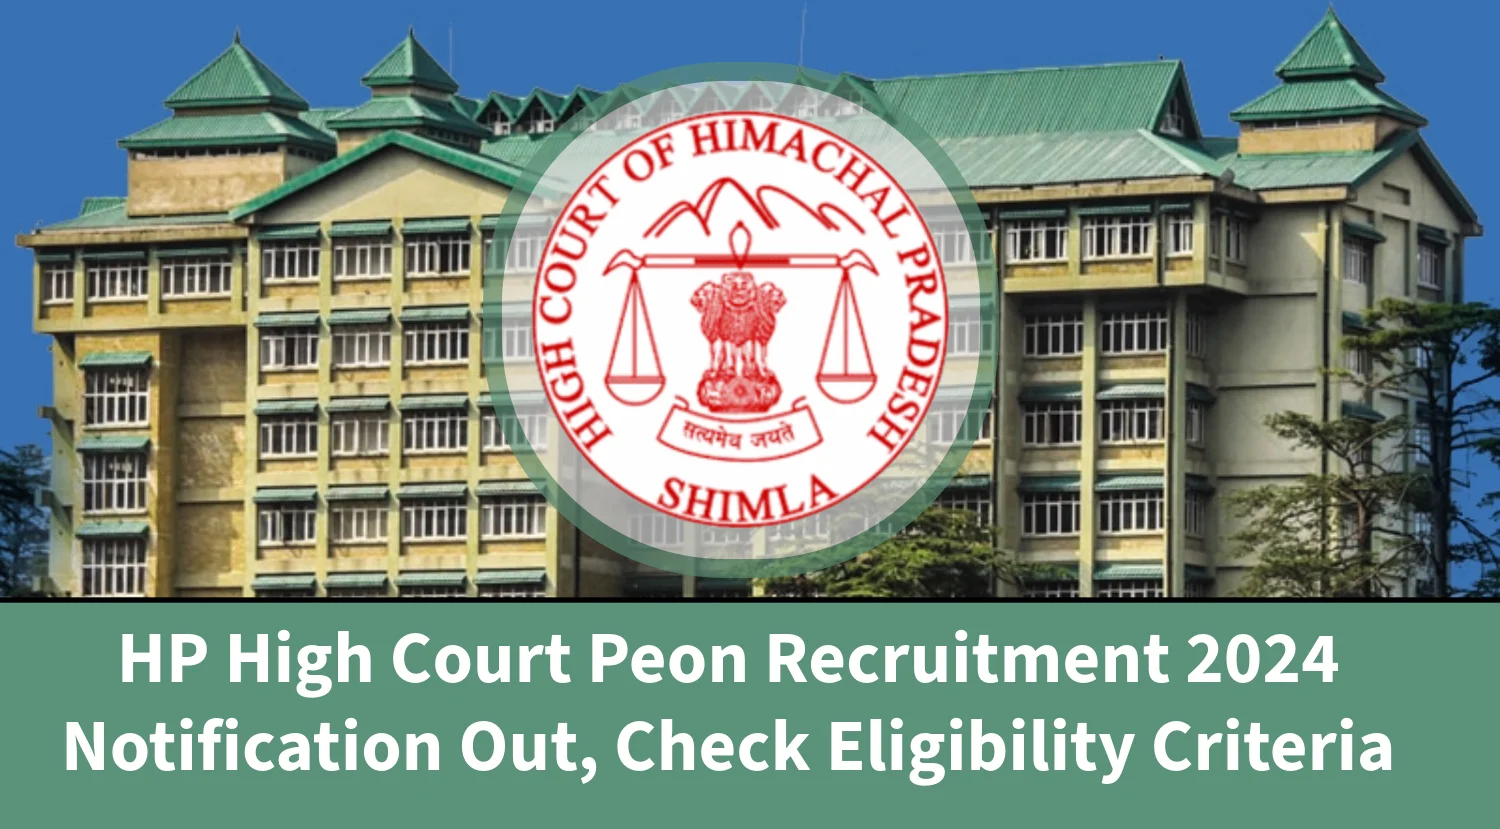 HP High Court Peon Recruitment 2024 Notification Out, Check Eligibility Criteria